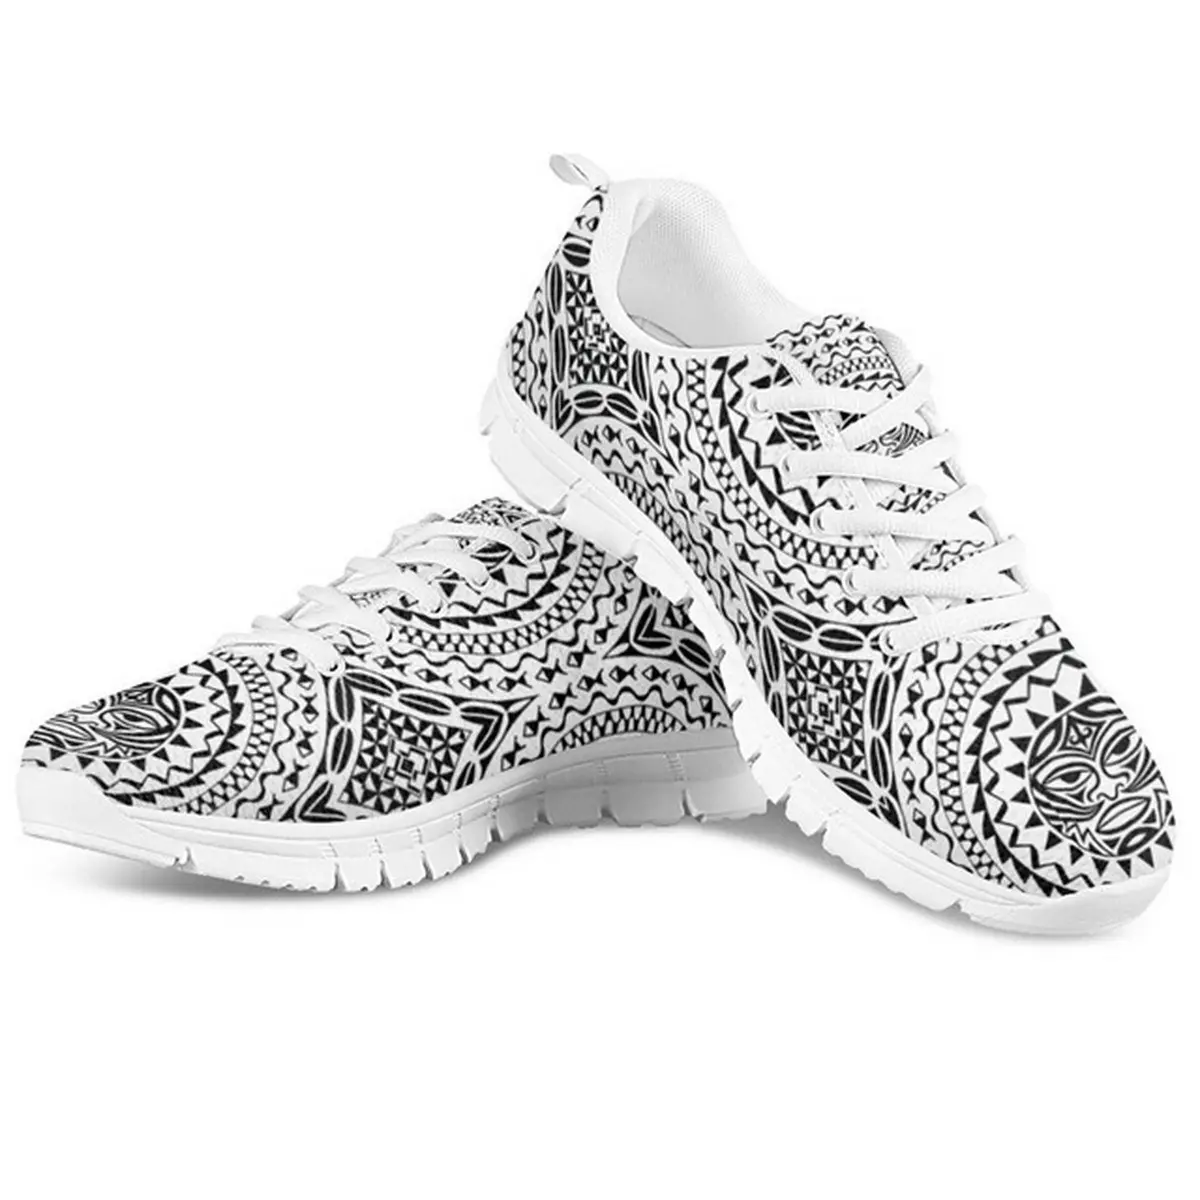 Winter Sneakers Men Fashion Trends Printed Sneakers High Quality Non Slip Ladies Footwear Sports Shoes Men's